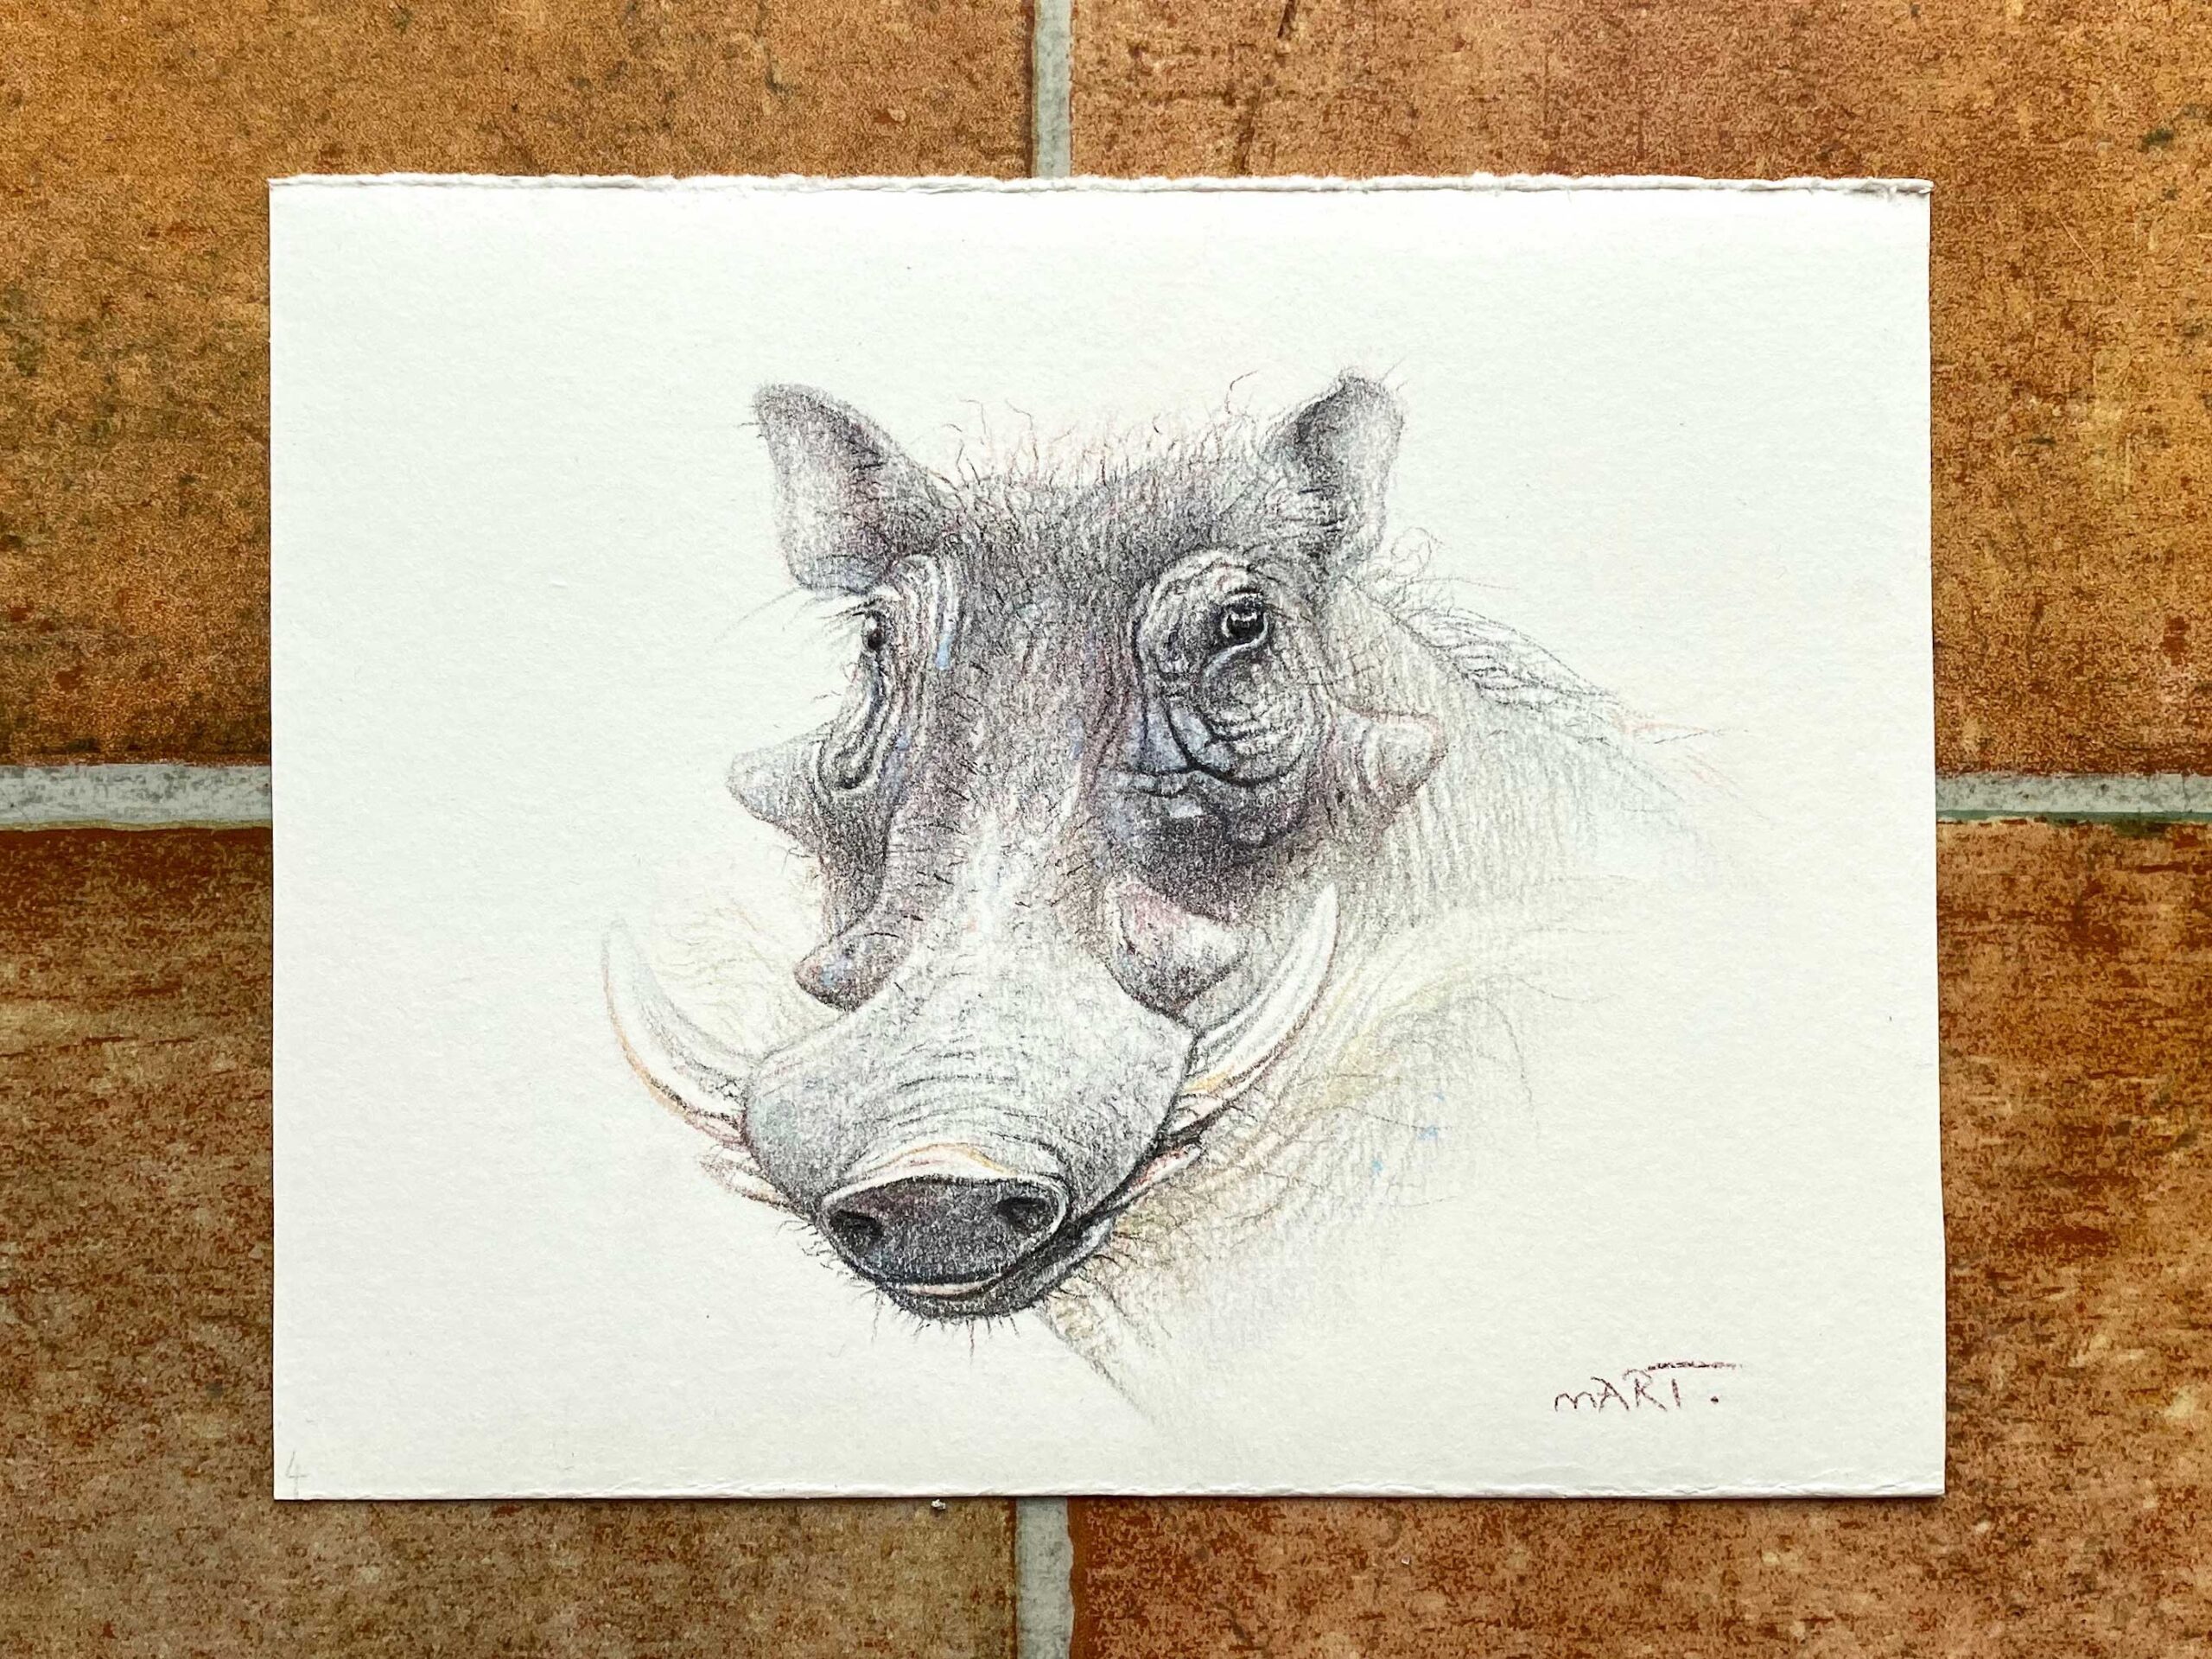 Buy this warthog by Martin Aveling in aid of conservation